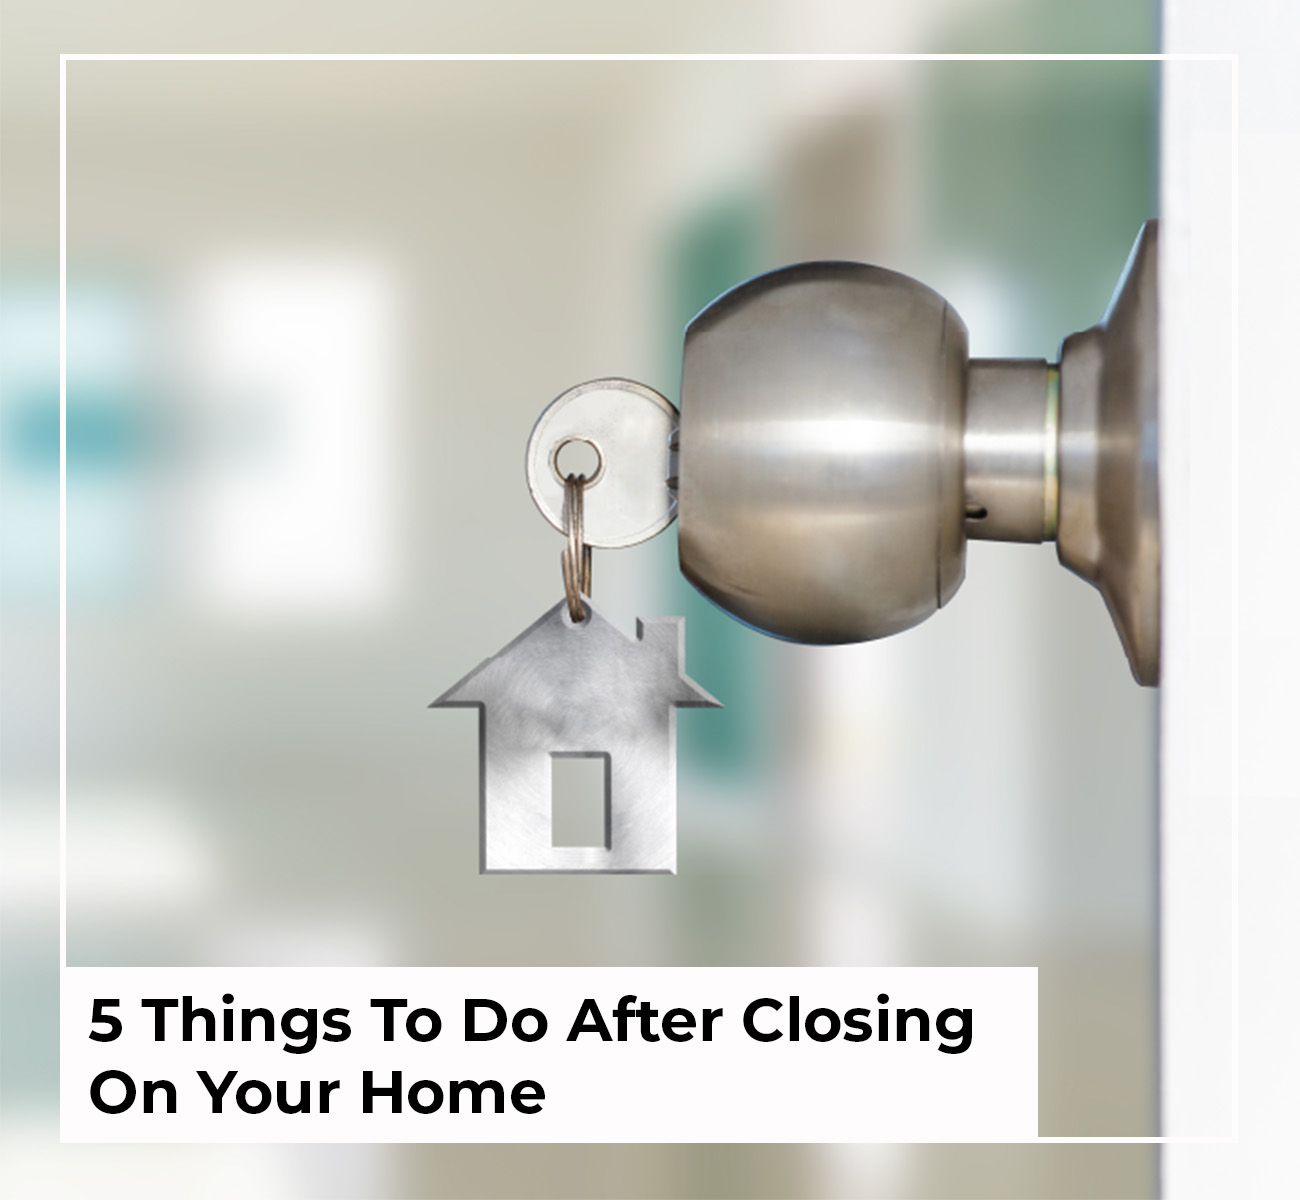 5 Things To Do After Closing On Your Home